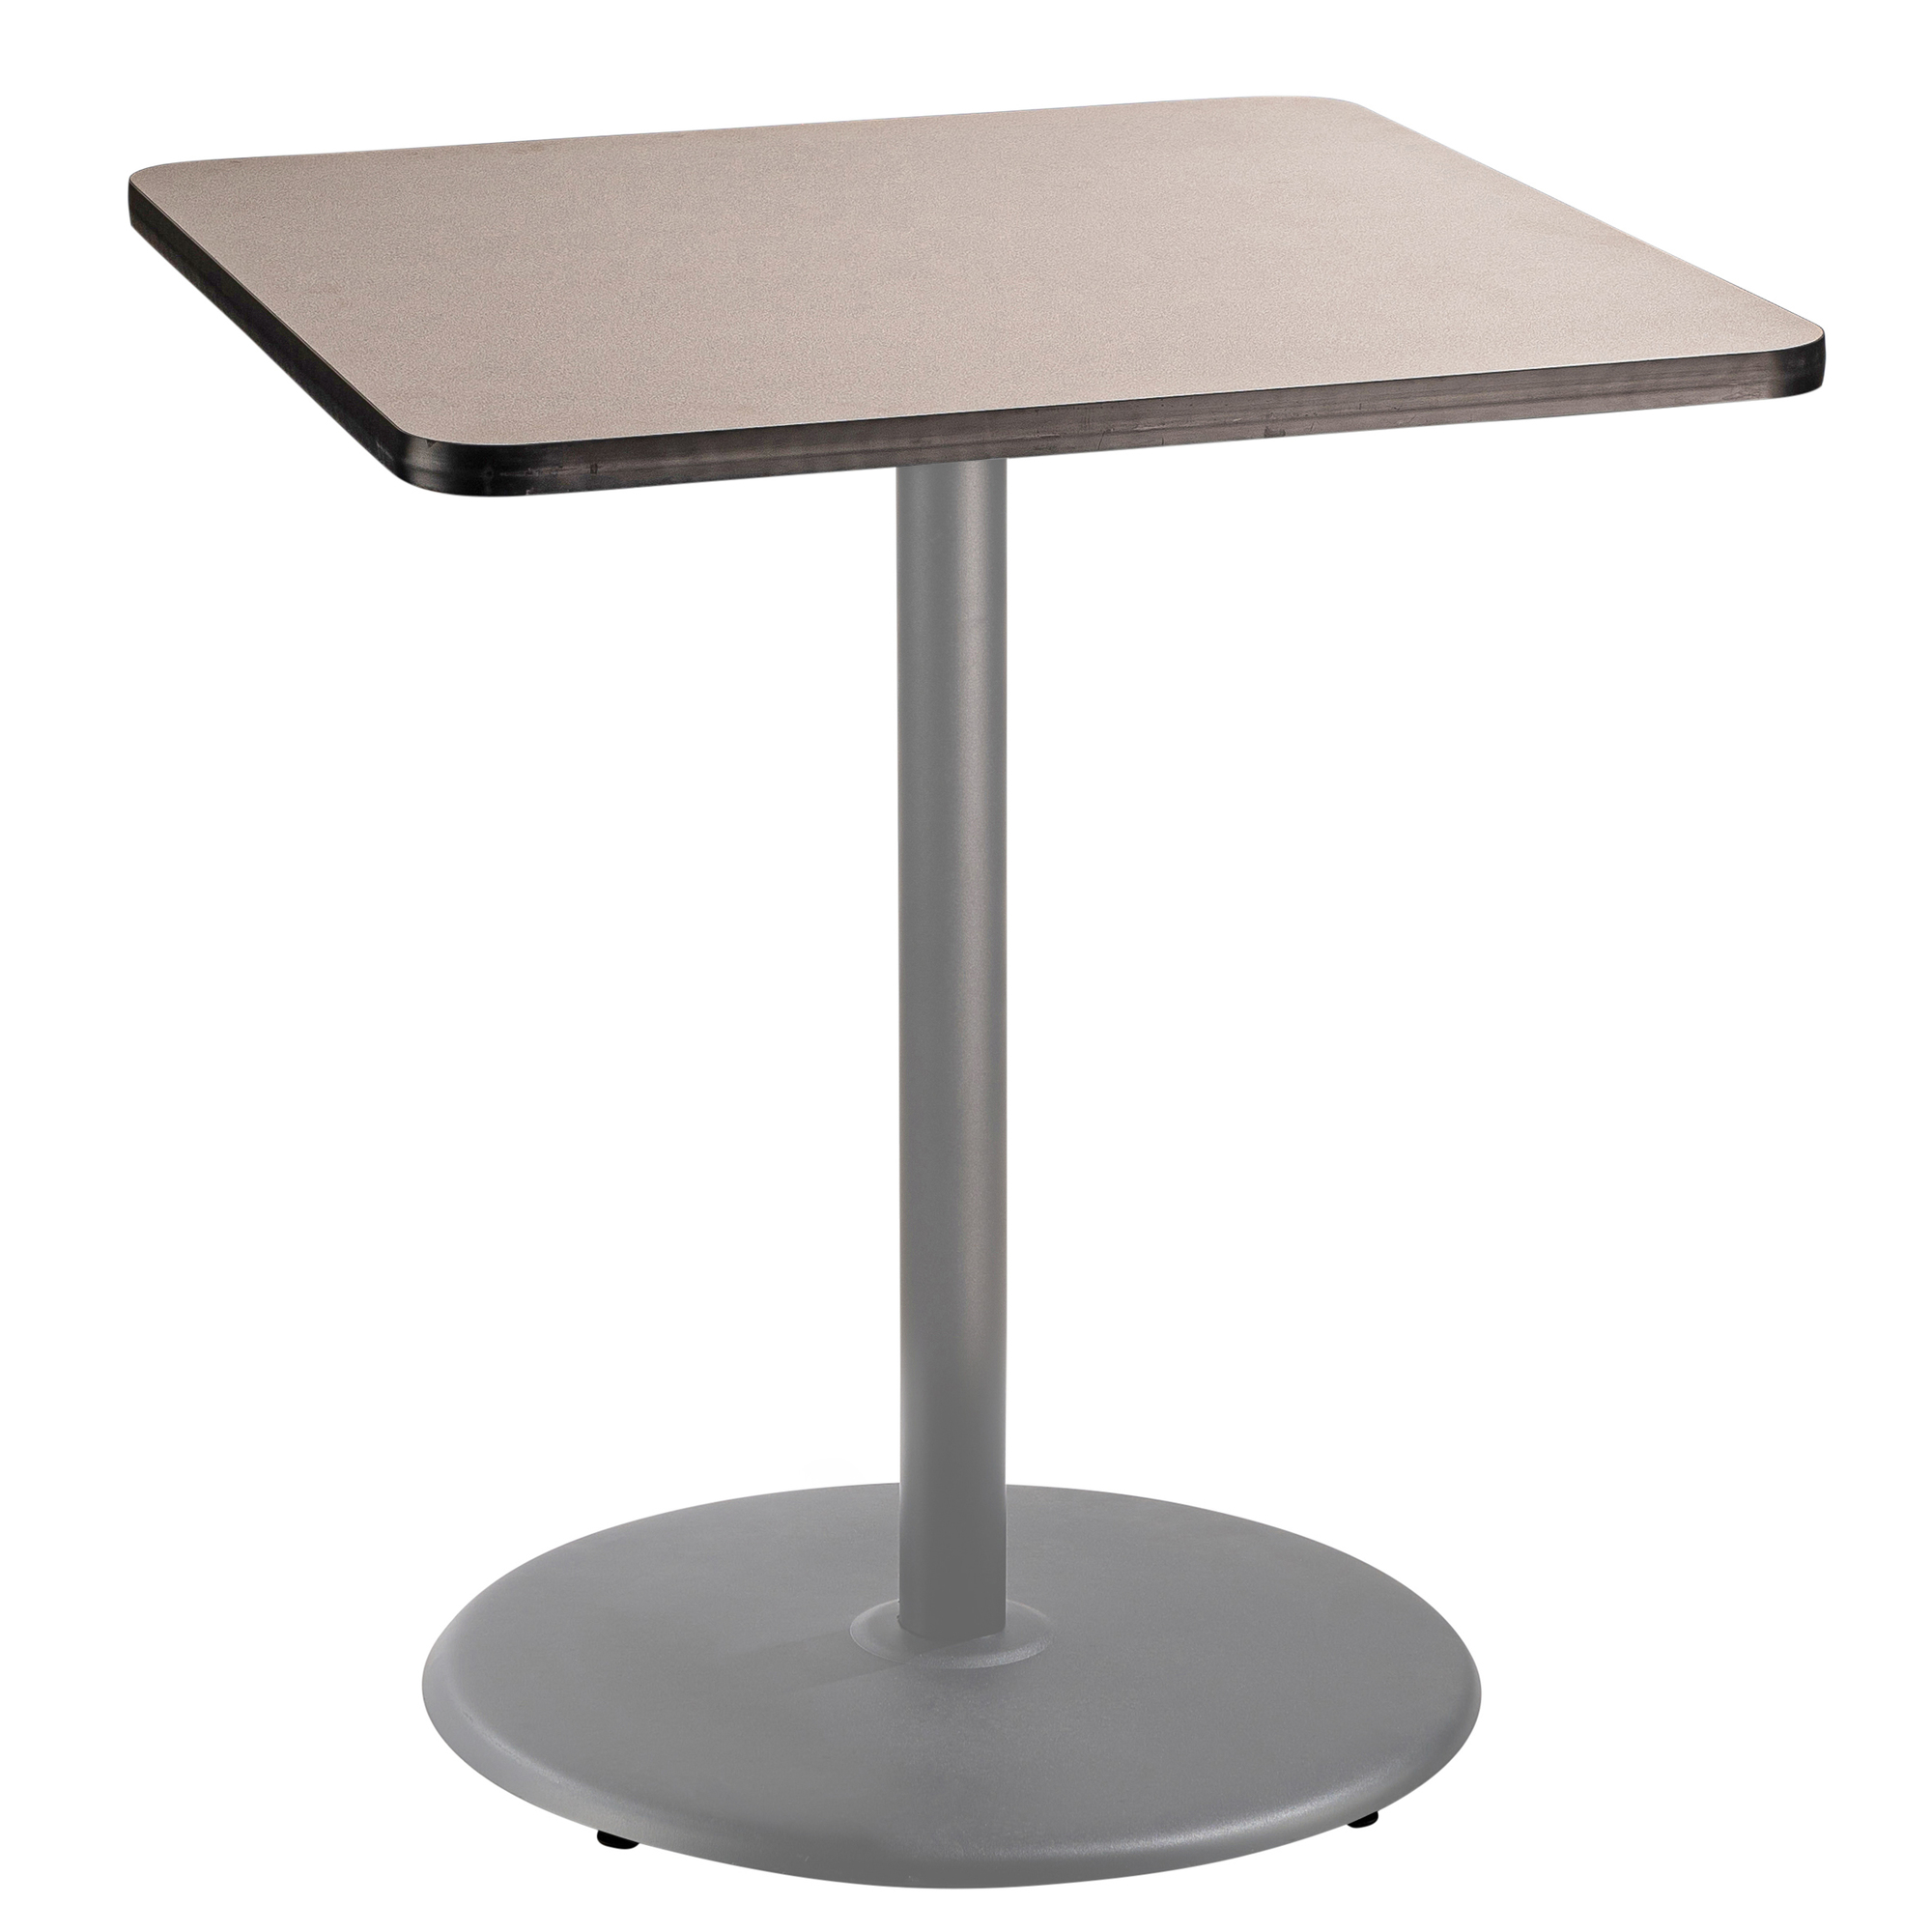 "National Public Seating, Cafe Table, 36x36x42Square ""R"" Base, Height 42 in, Model CTG33636RBPBTMGY"